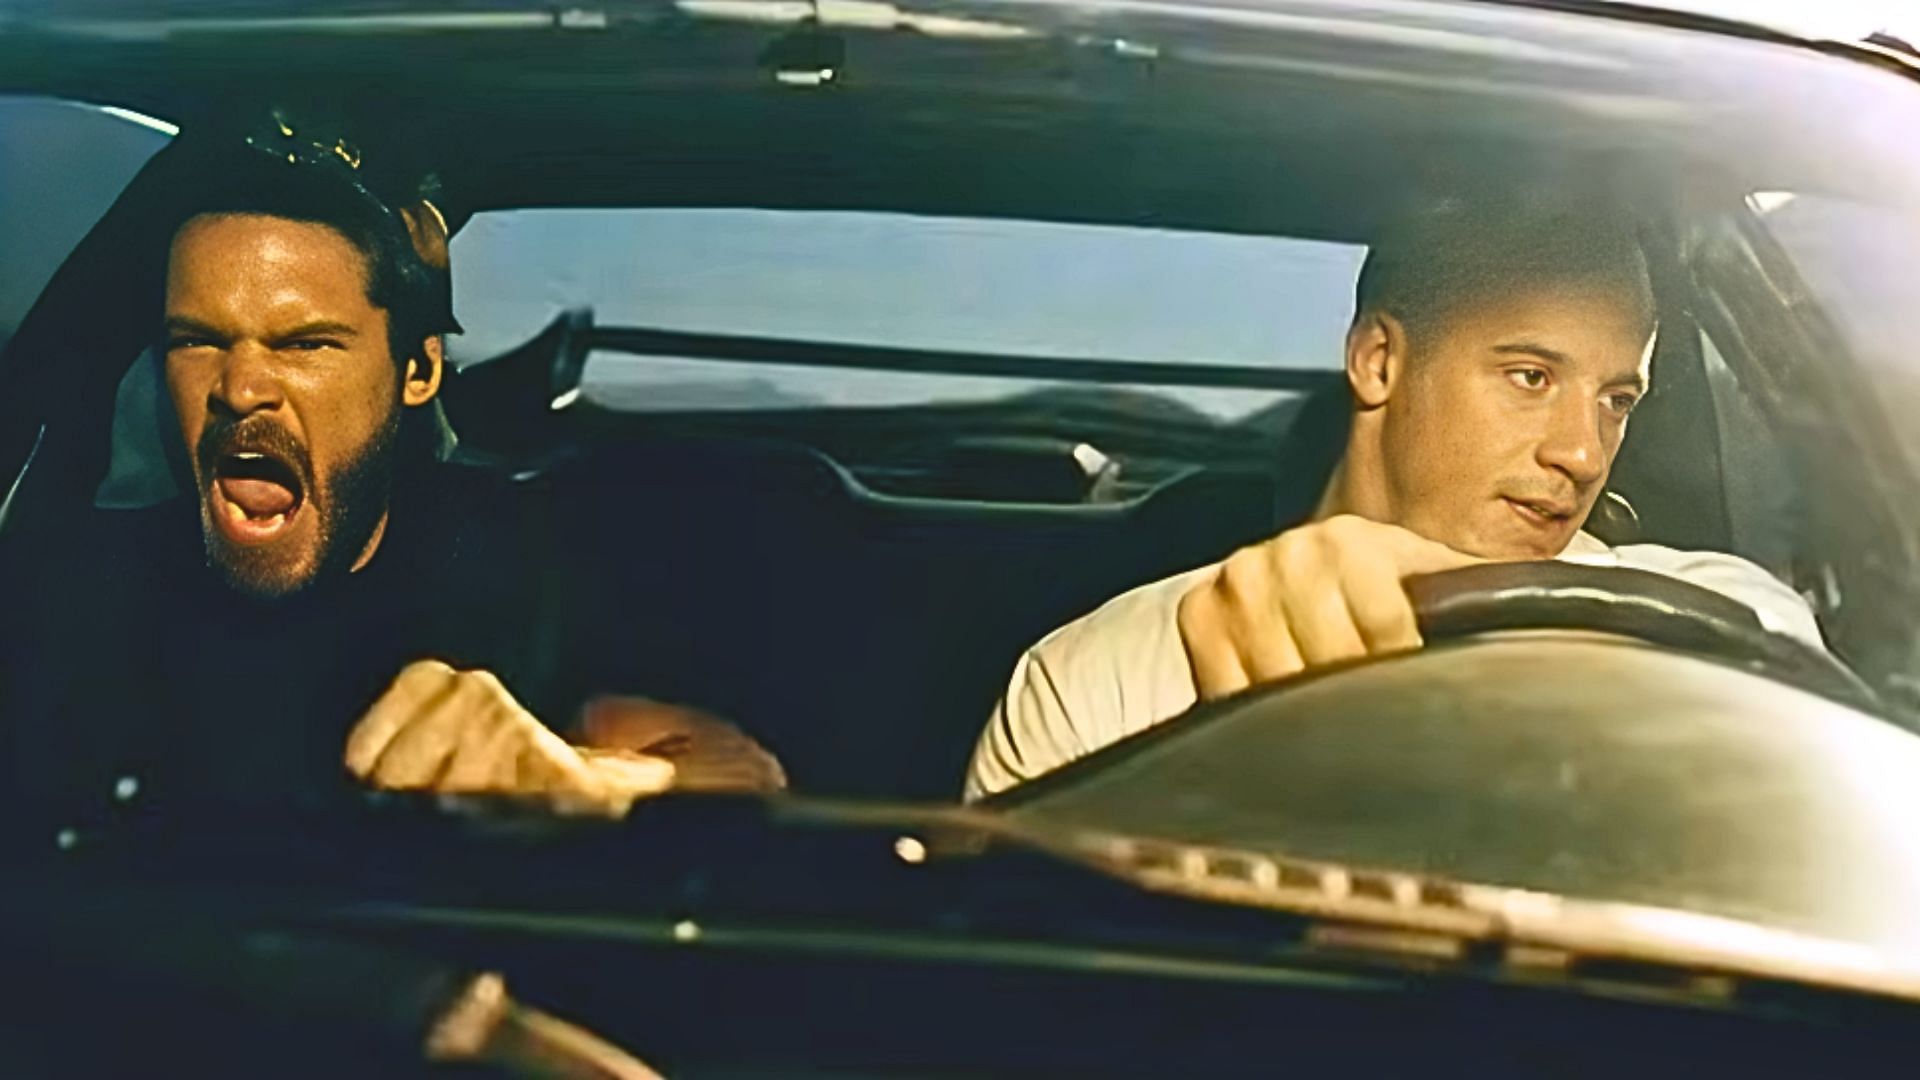 Paul Walker (L) and Vin Diesel (R) in The Fast And The Furious (Image via YouTube/The Fast Saga, 1:12)